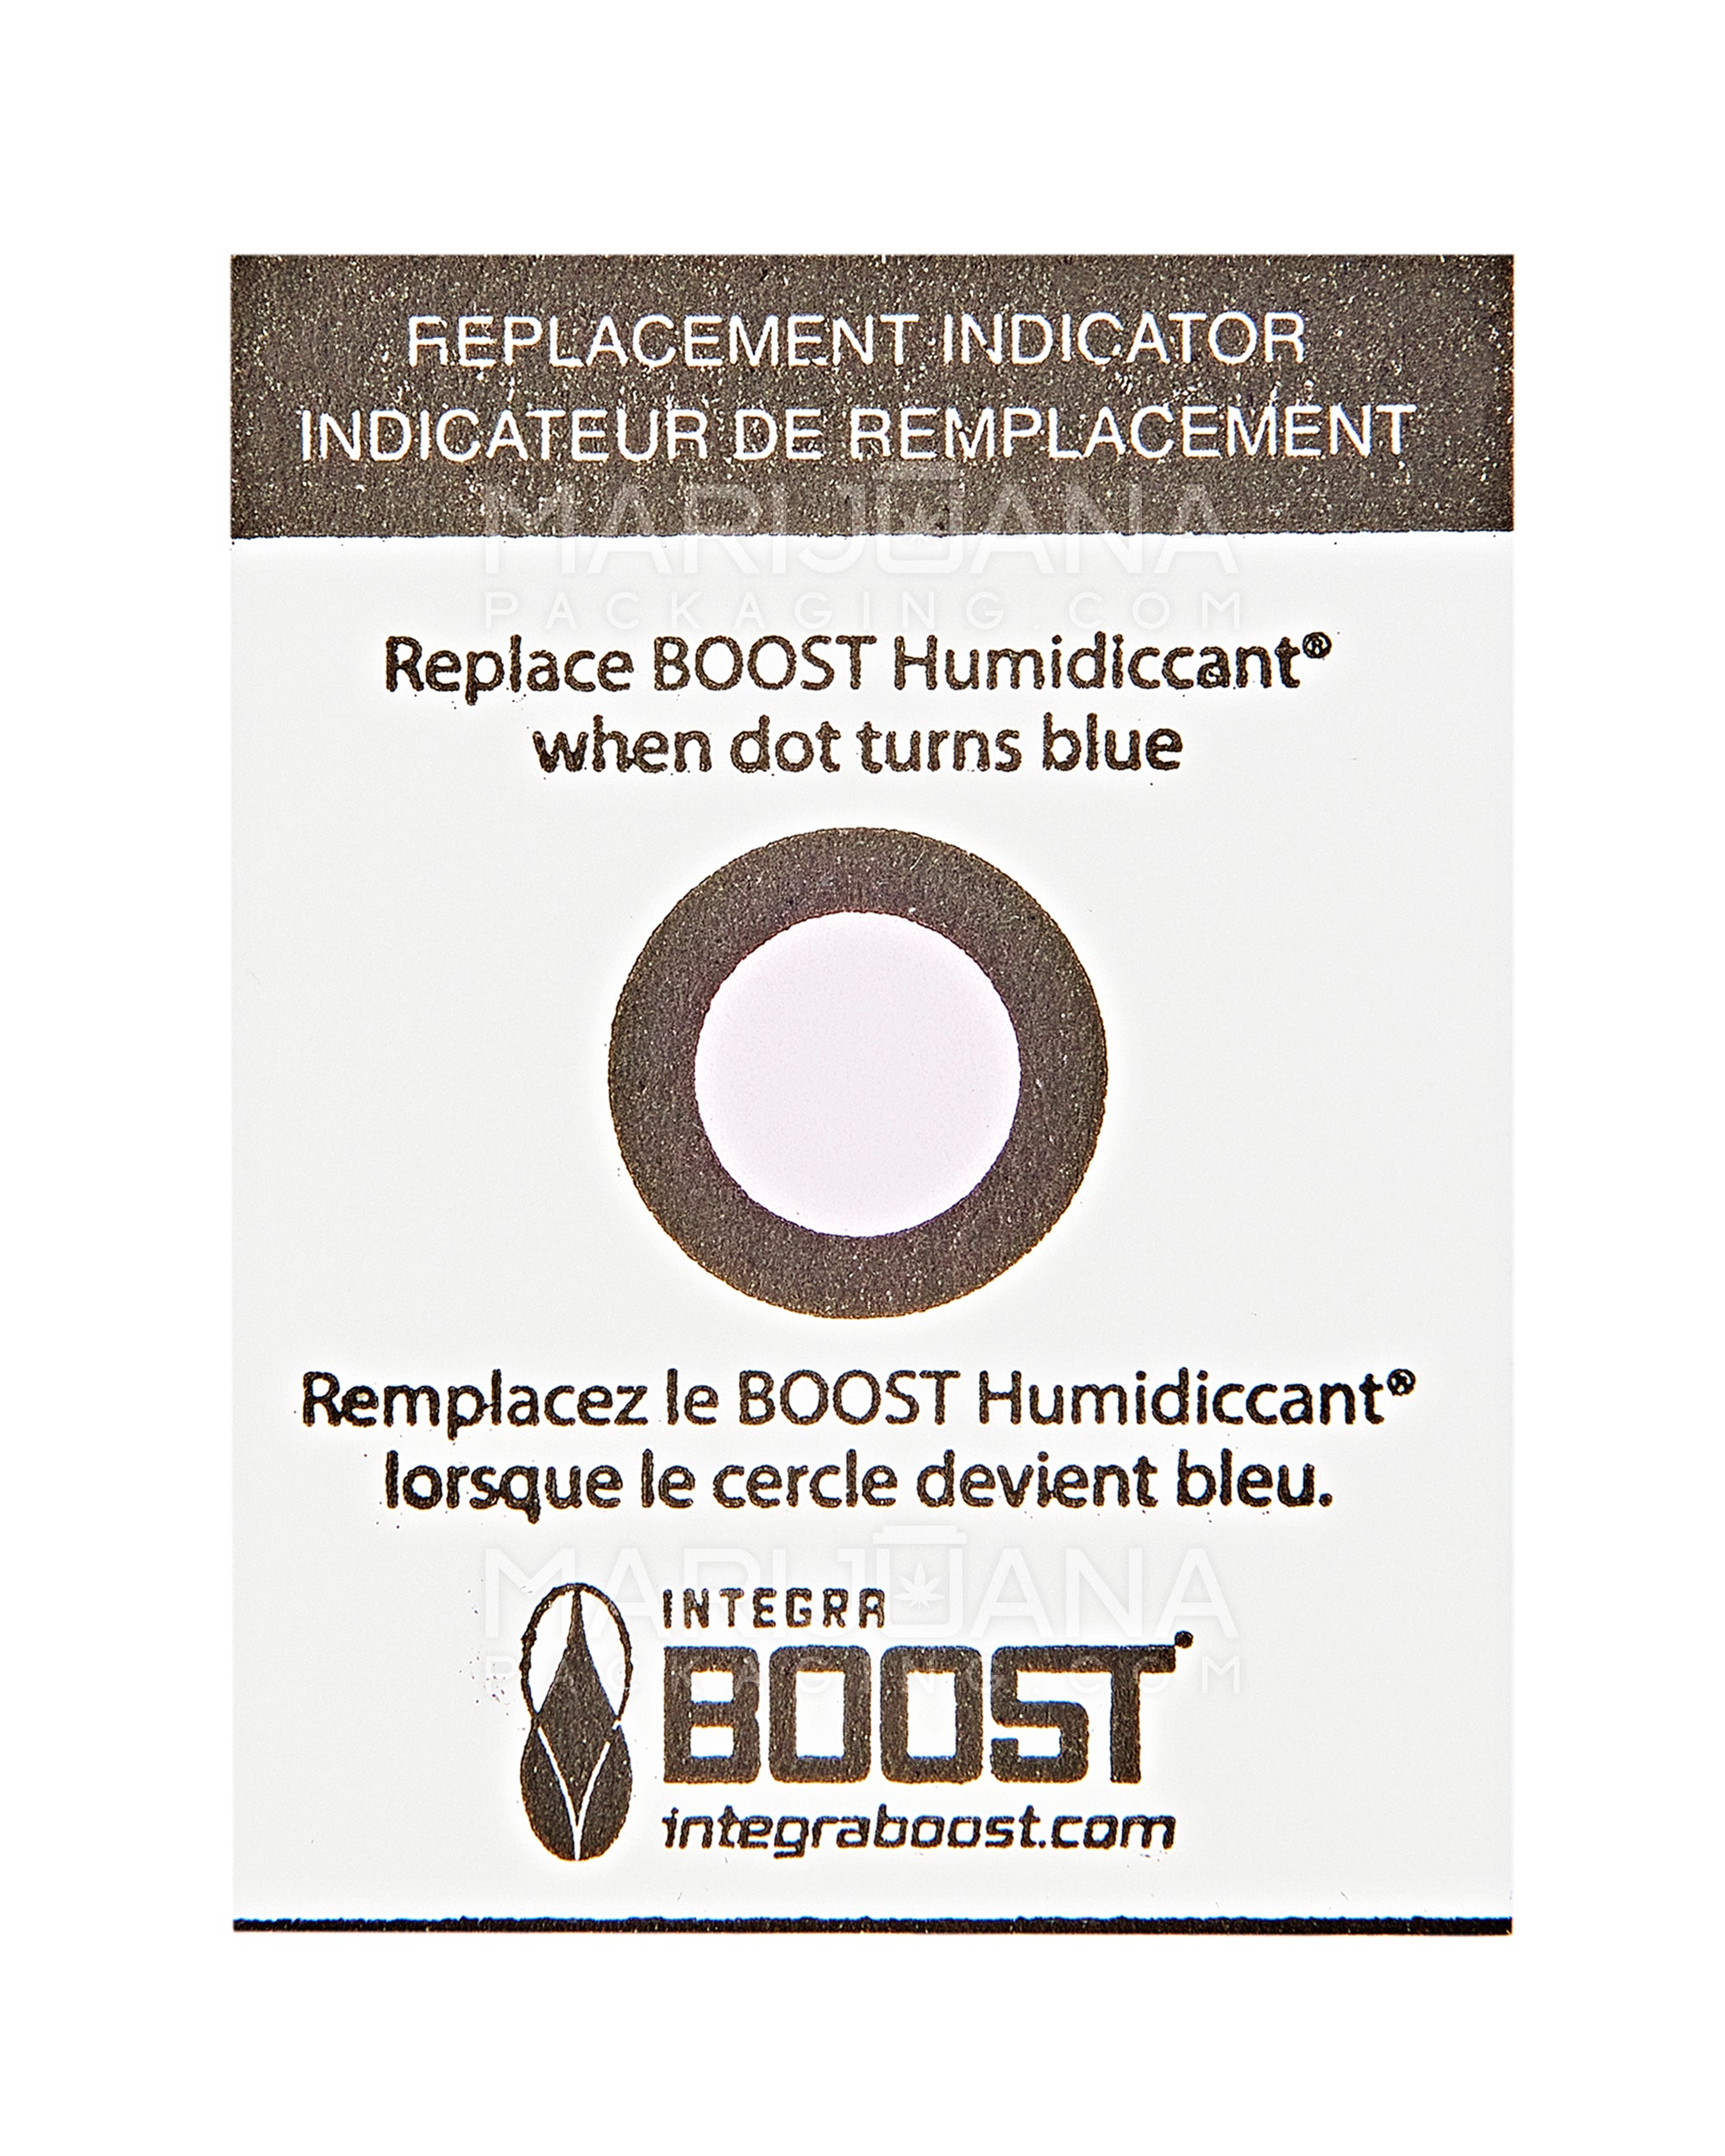 INTEGRA | Boost Humidity Packs | 67 Grams - 62% - 24 Count